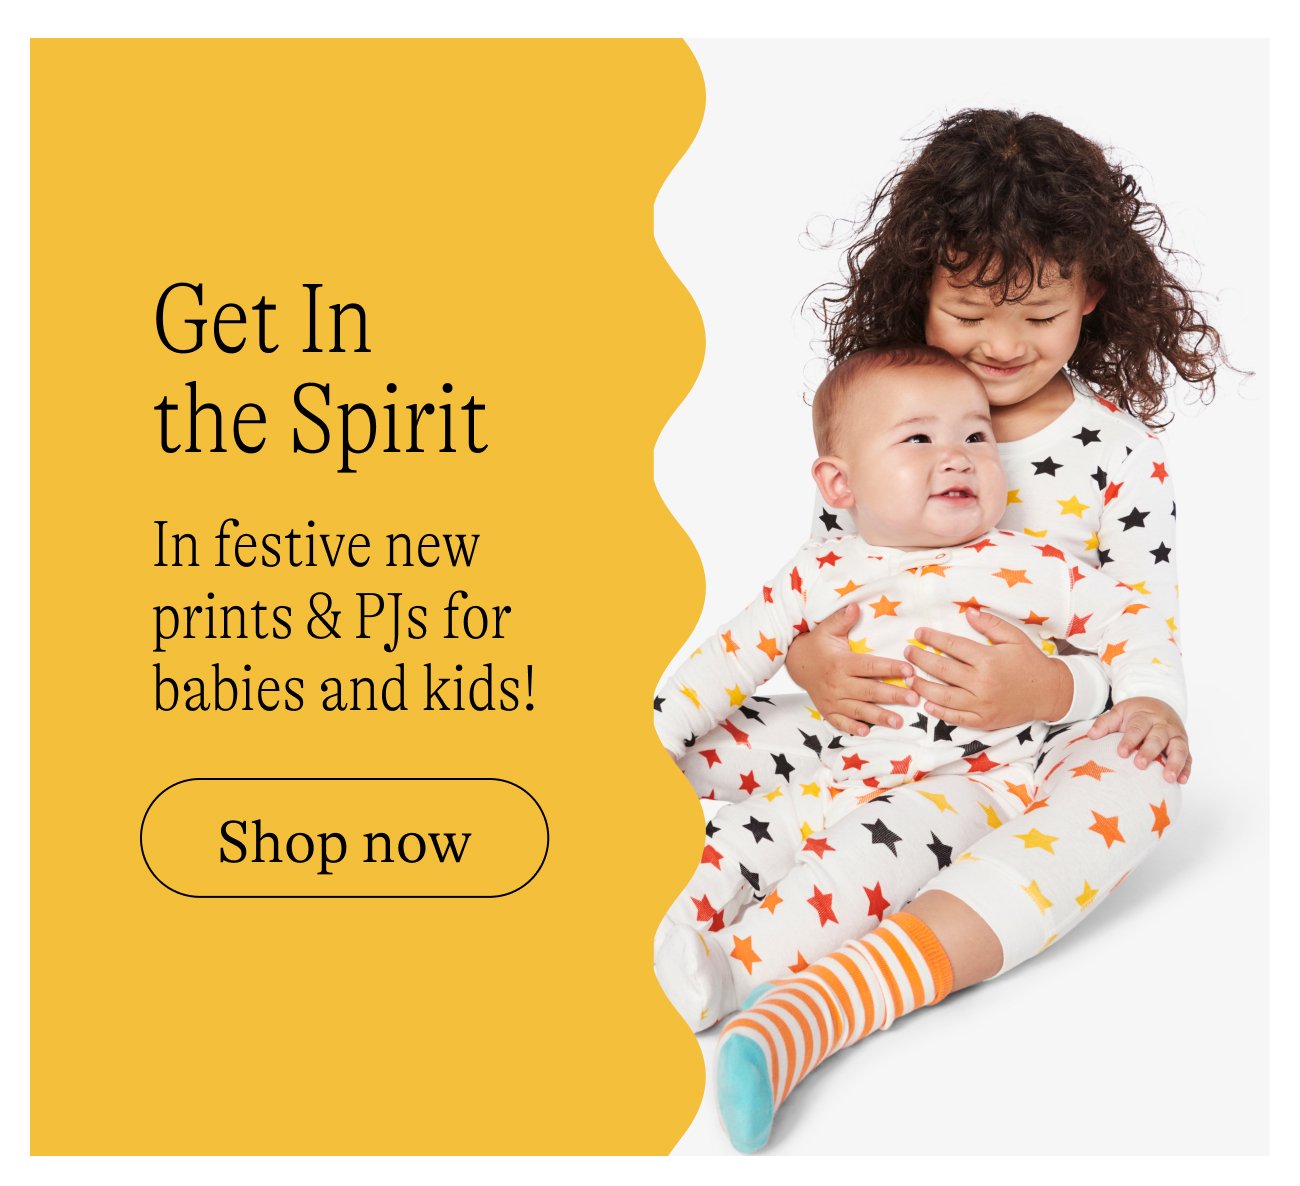 Get In  the Spirit: In festive new prints & PJs for babies and kids! Shop now.